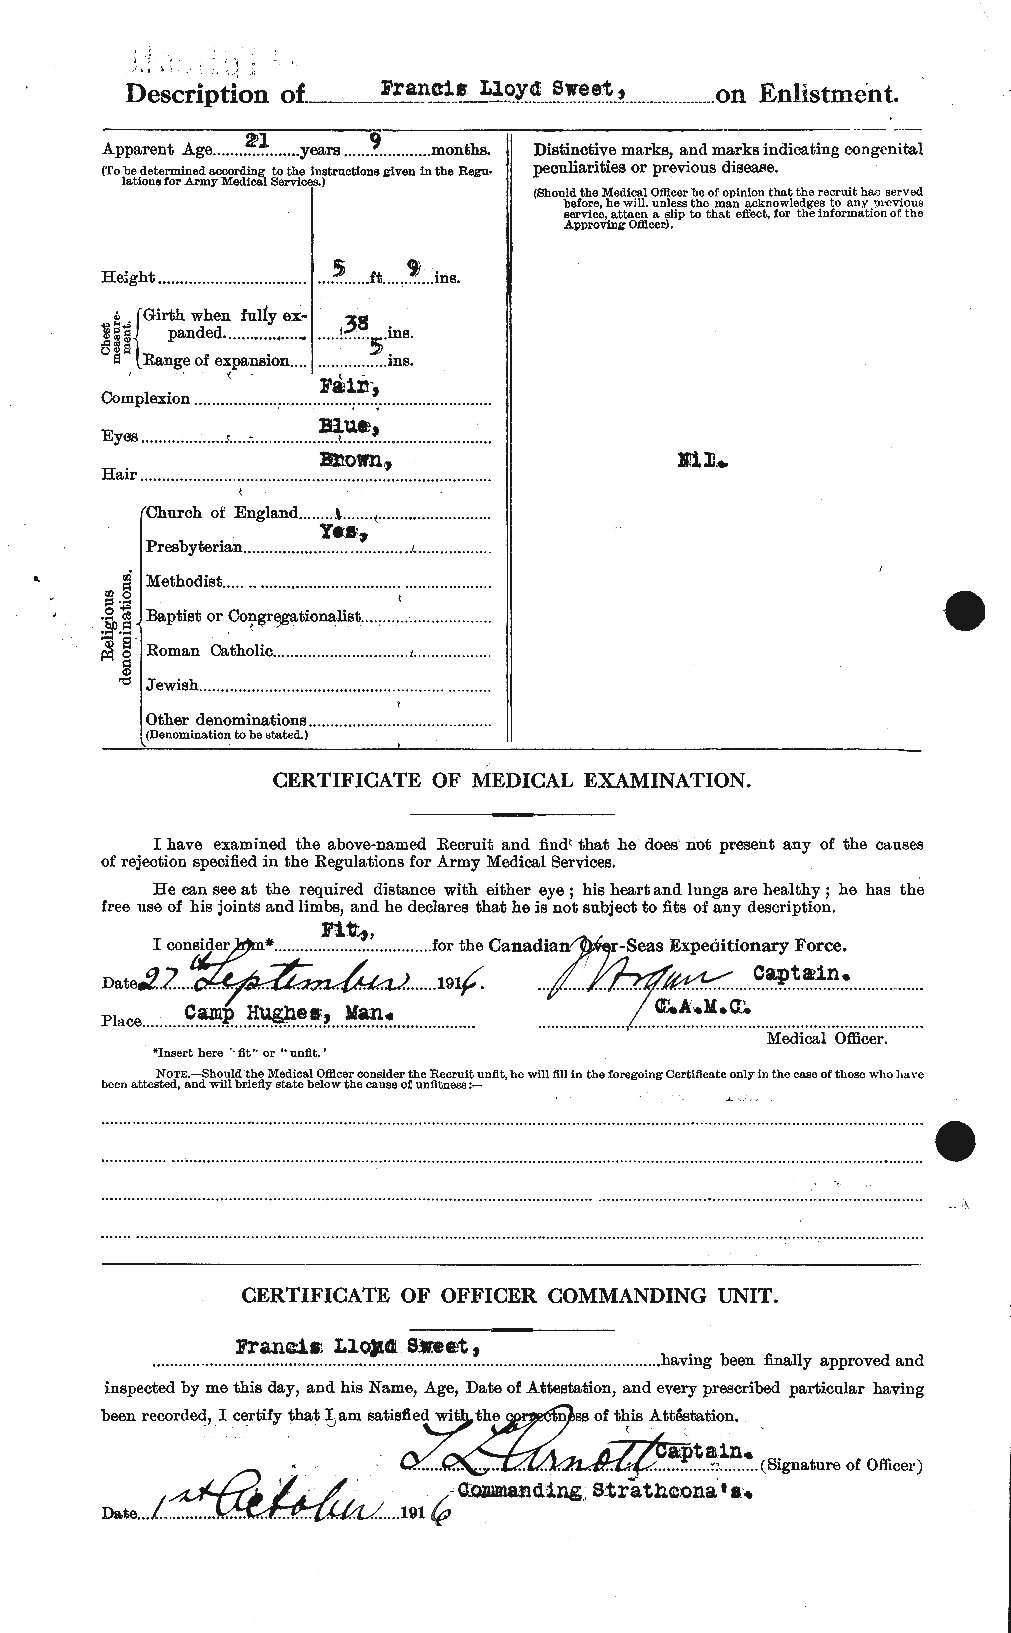 Personnel Records of the First World War - CEF 129460b